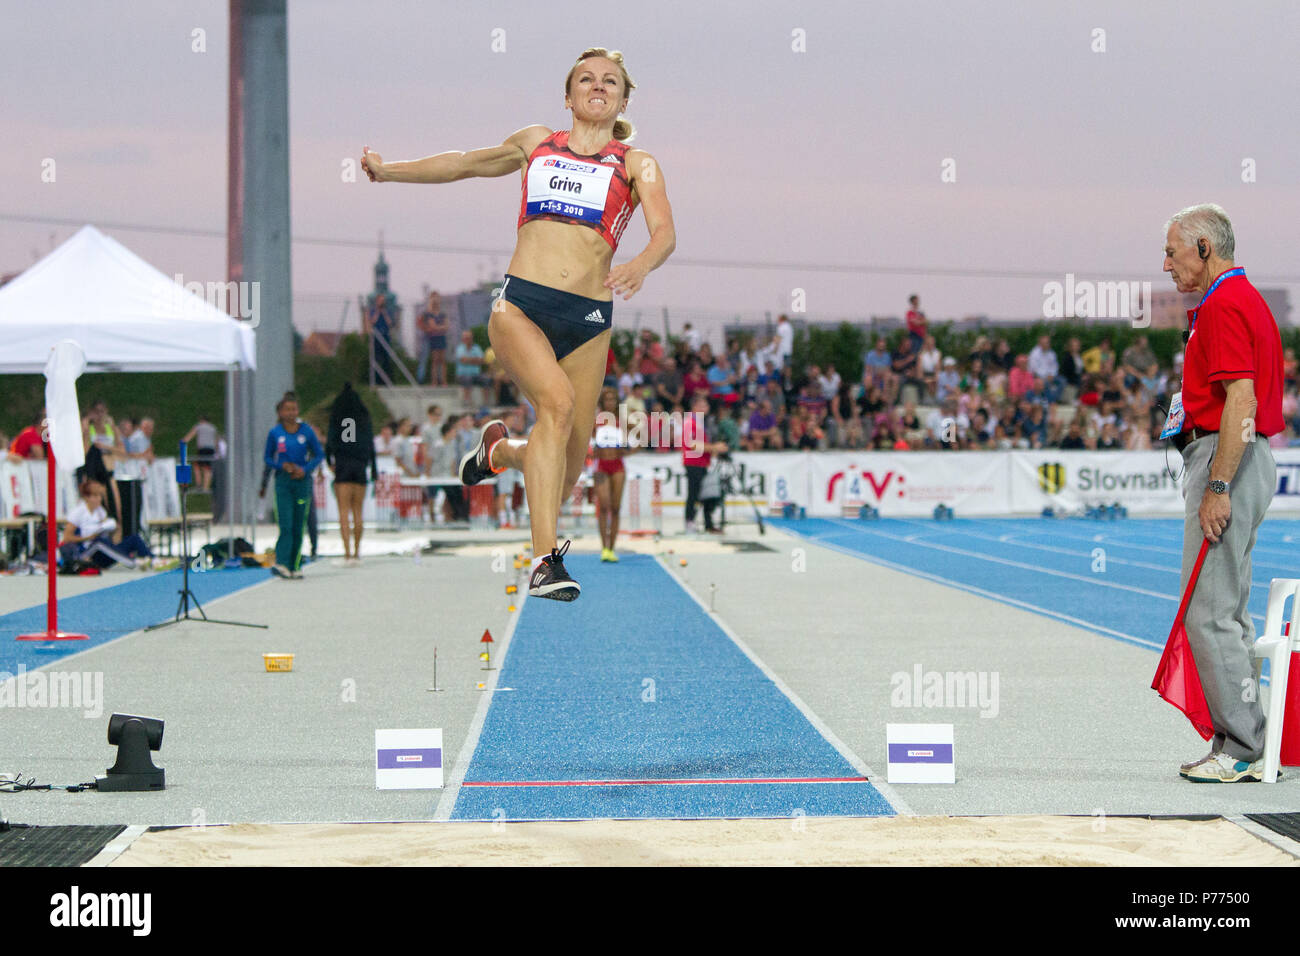 Latvian long jumper Lauma Griva competing at the P-T-S athletics meeting in the sports site of x-bionic sphere® in Samorín, Slovakia Stock Photo